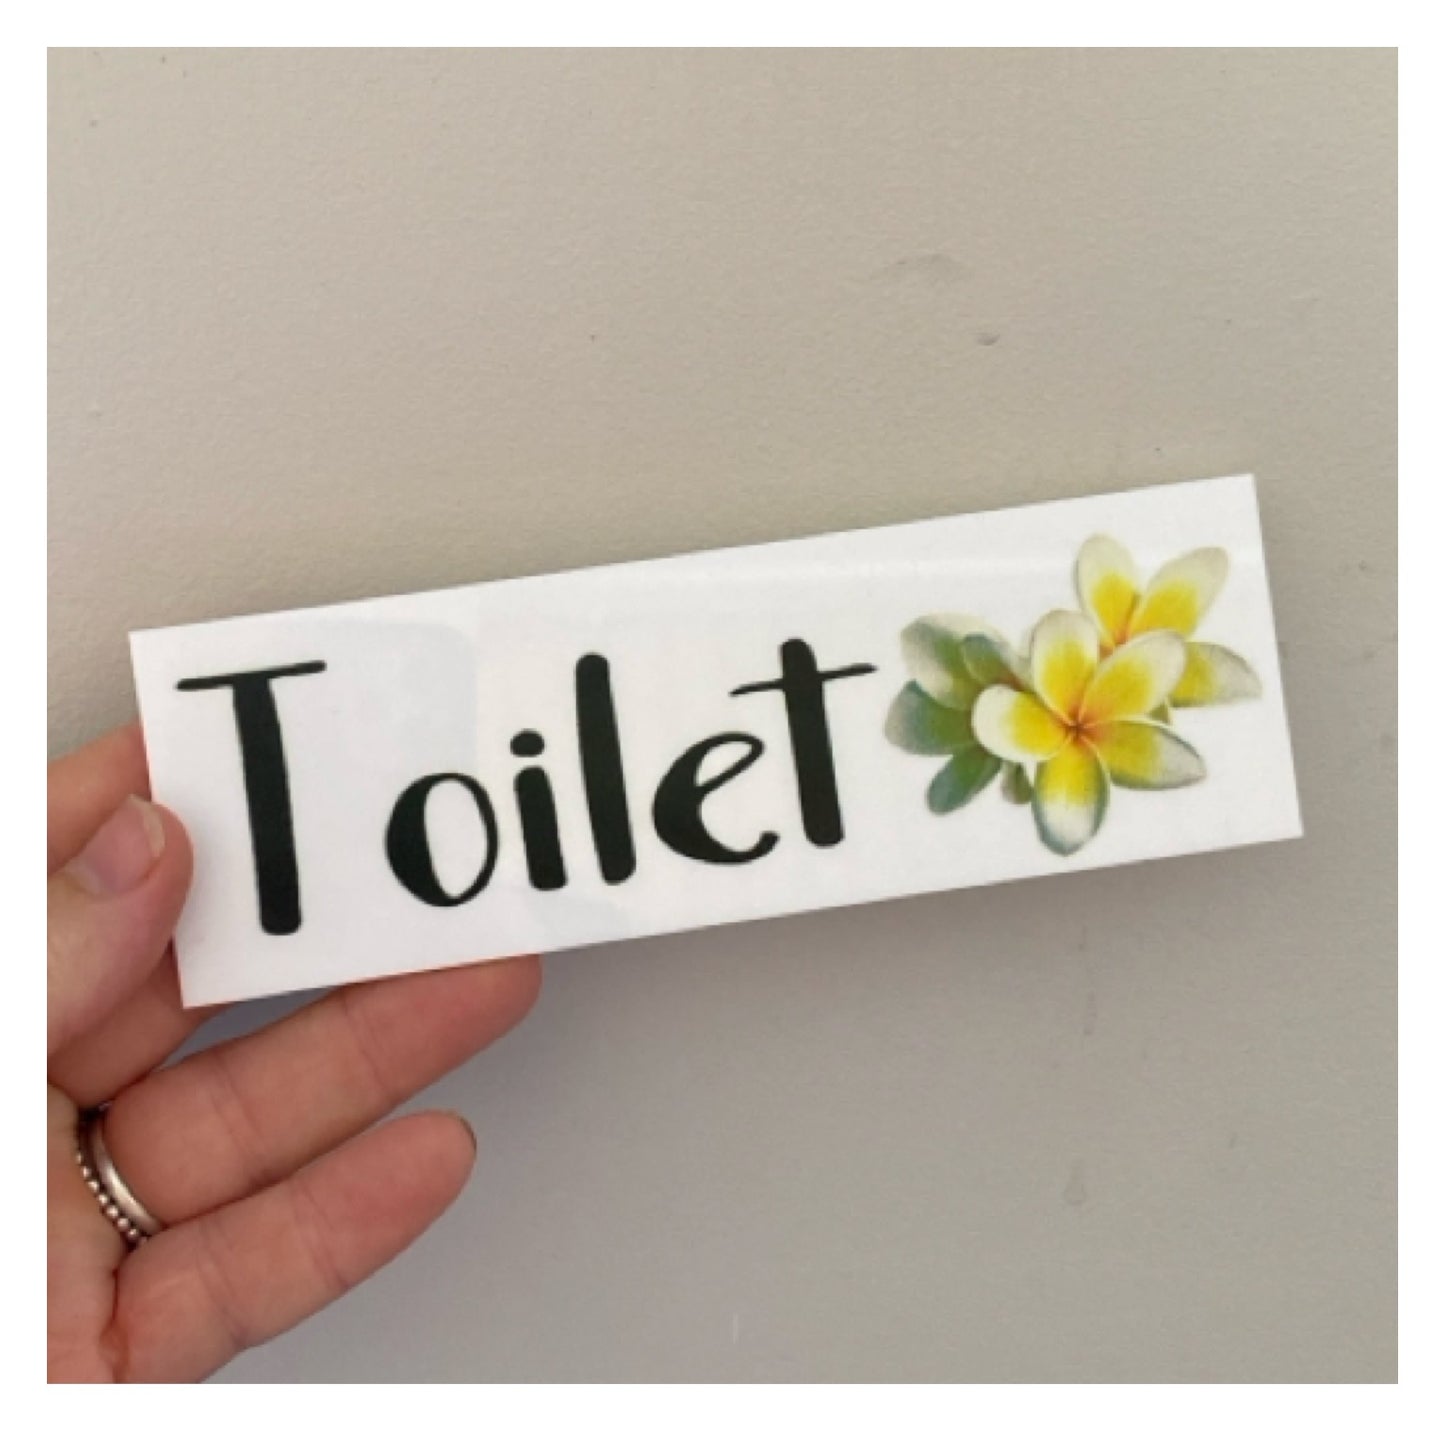 Frangipani Toilet Laundry Bathroom Door Sign - The Renmy Store Homewares & Gifts 